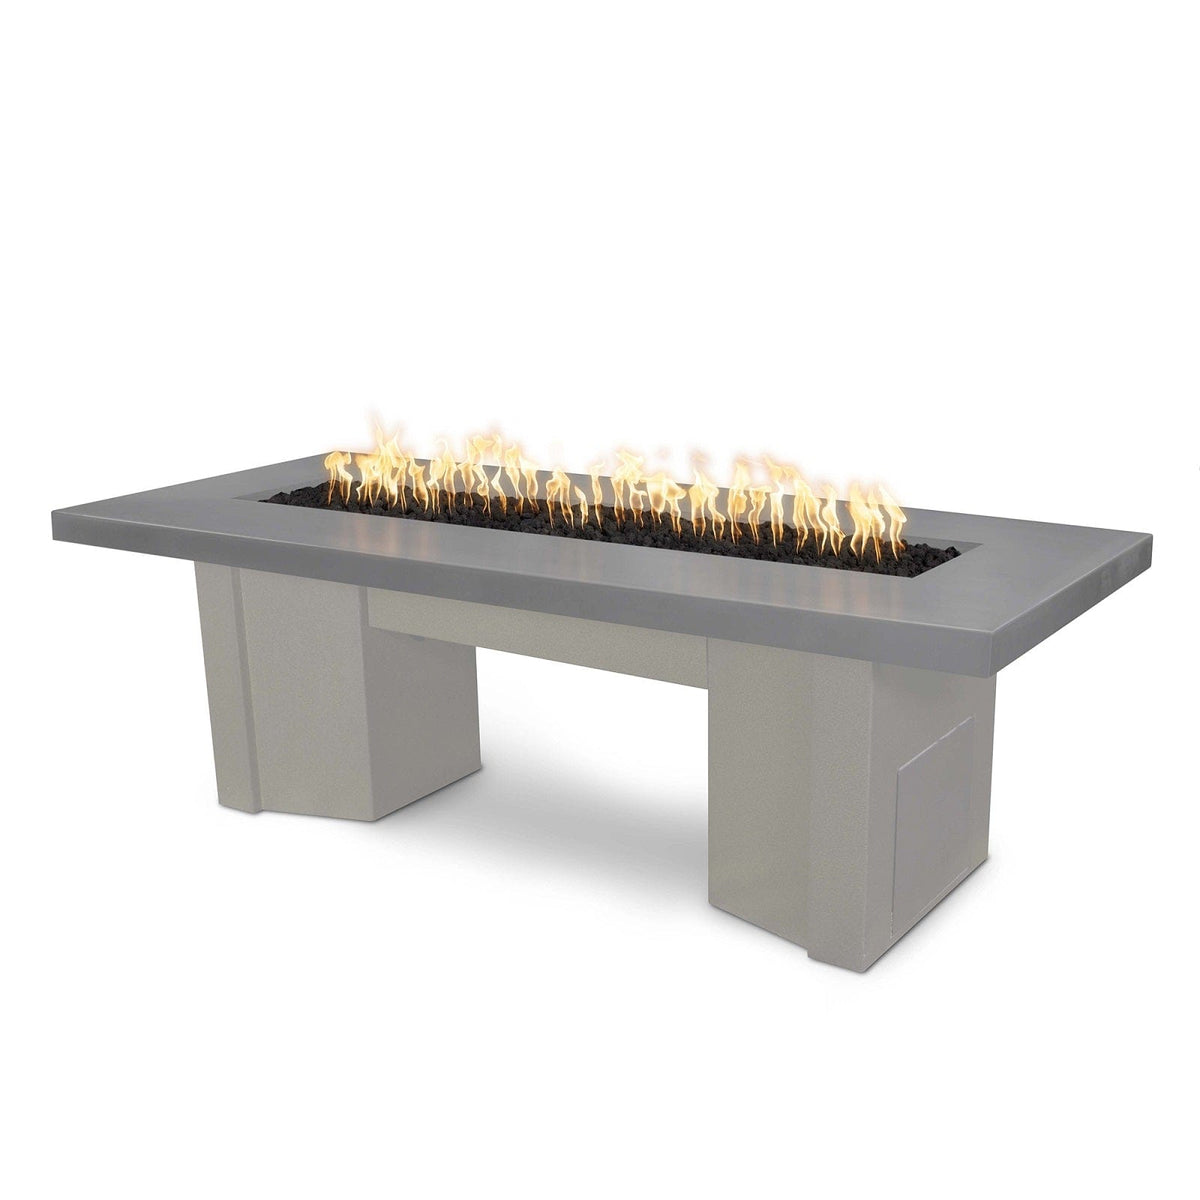 The Outdoor Plus Fire Features Natural Gray (-NGY) / Pewter Powder Coated Steel (-PEW) The Outdoor Plus 60&quot; Alameda Fire Table Smooth Concrete in Liquid Propane - Match Lit with Flame Sense System / OPT-ALMGFRC60FSML-LP